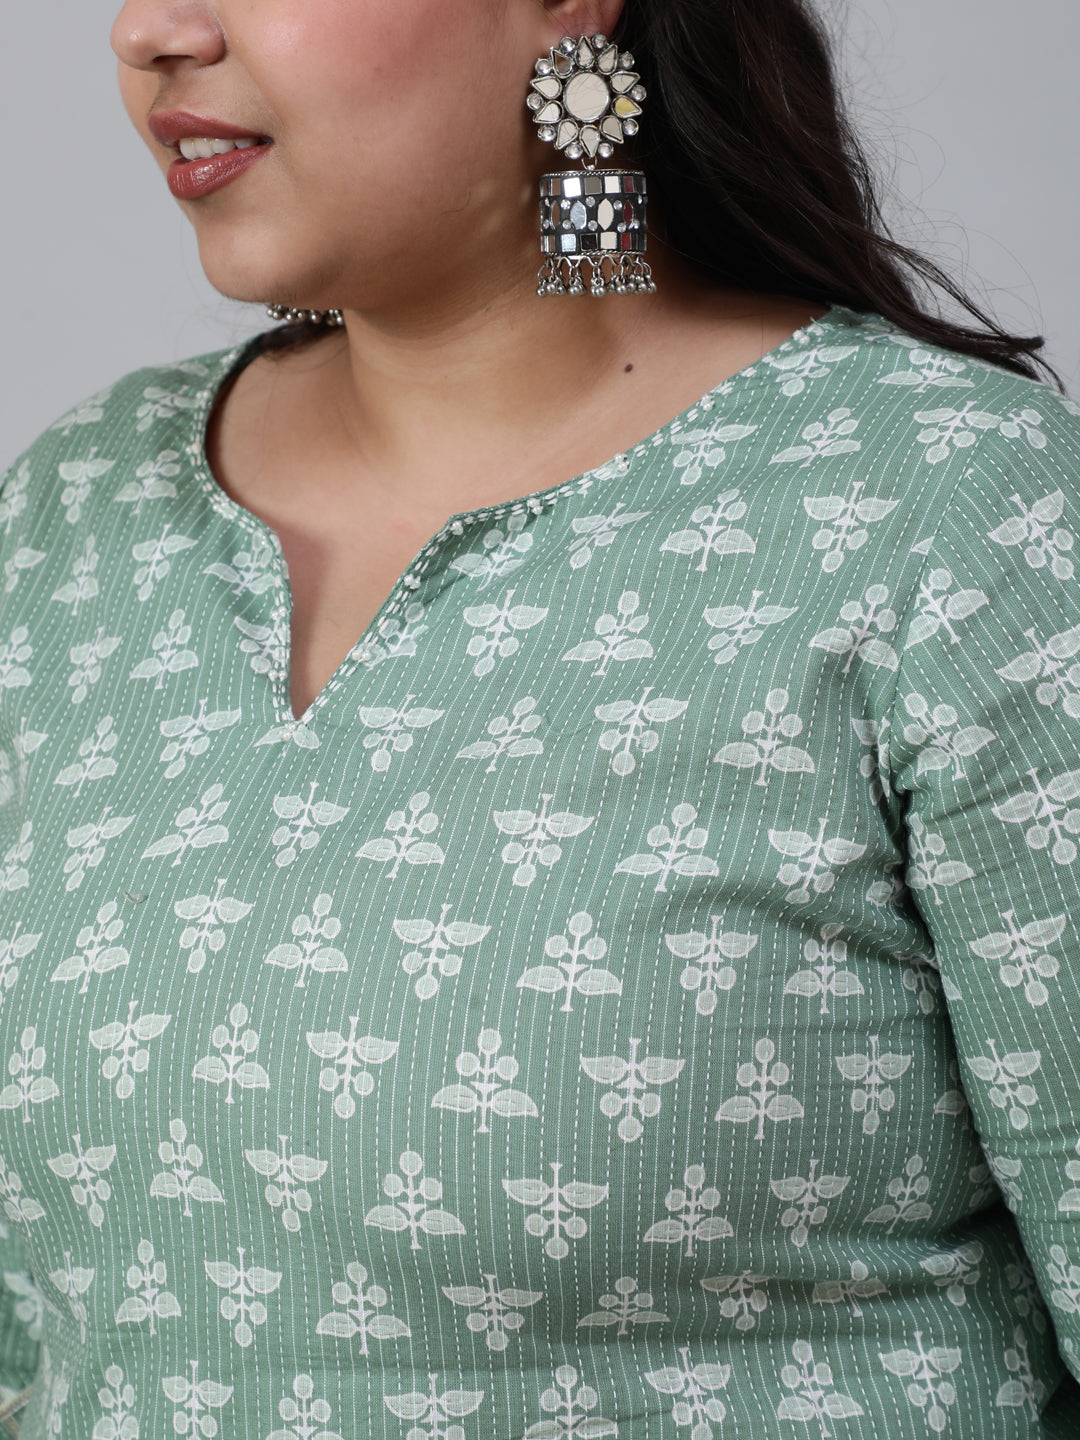 Women Plus Size Green Woven Straight Ethnic Printed Embroidered Kurta With Printed Palazzo & Solid Dupatta With Print And Lace Taping